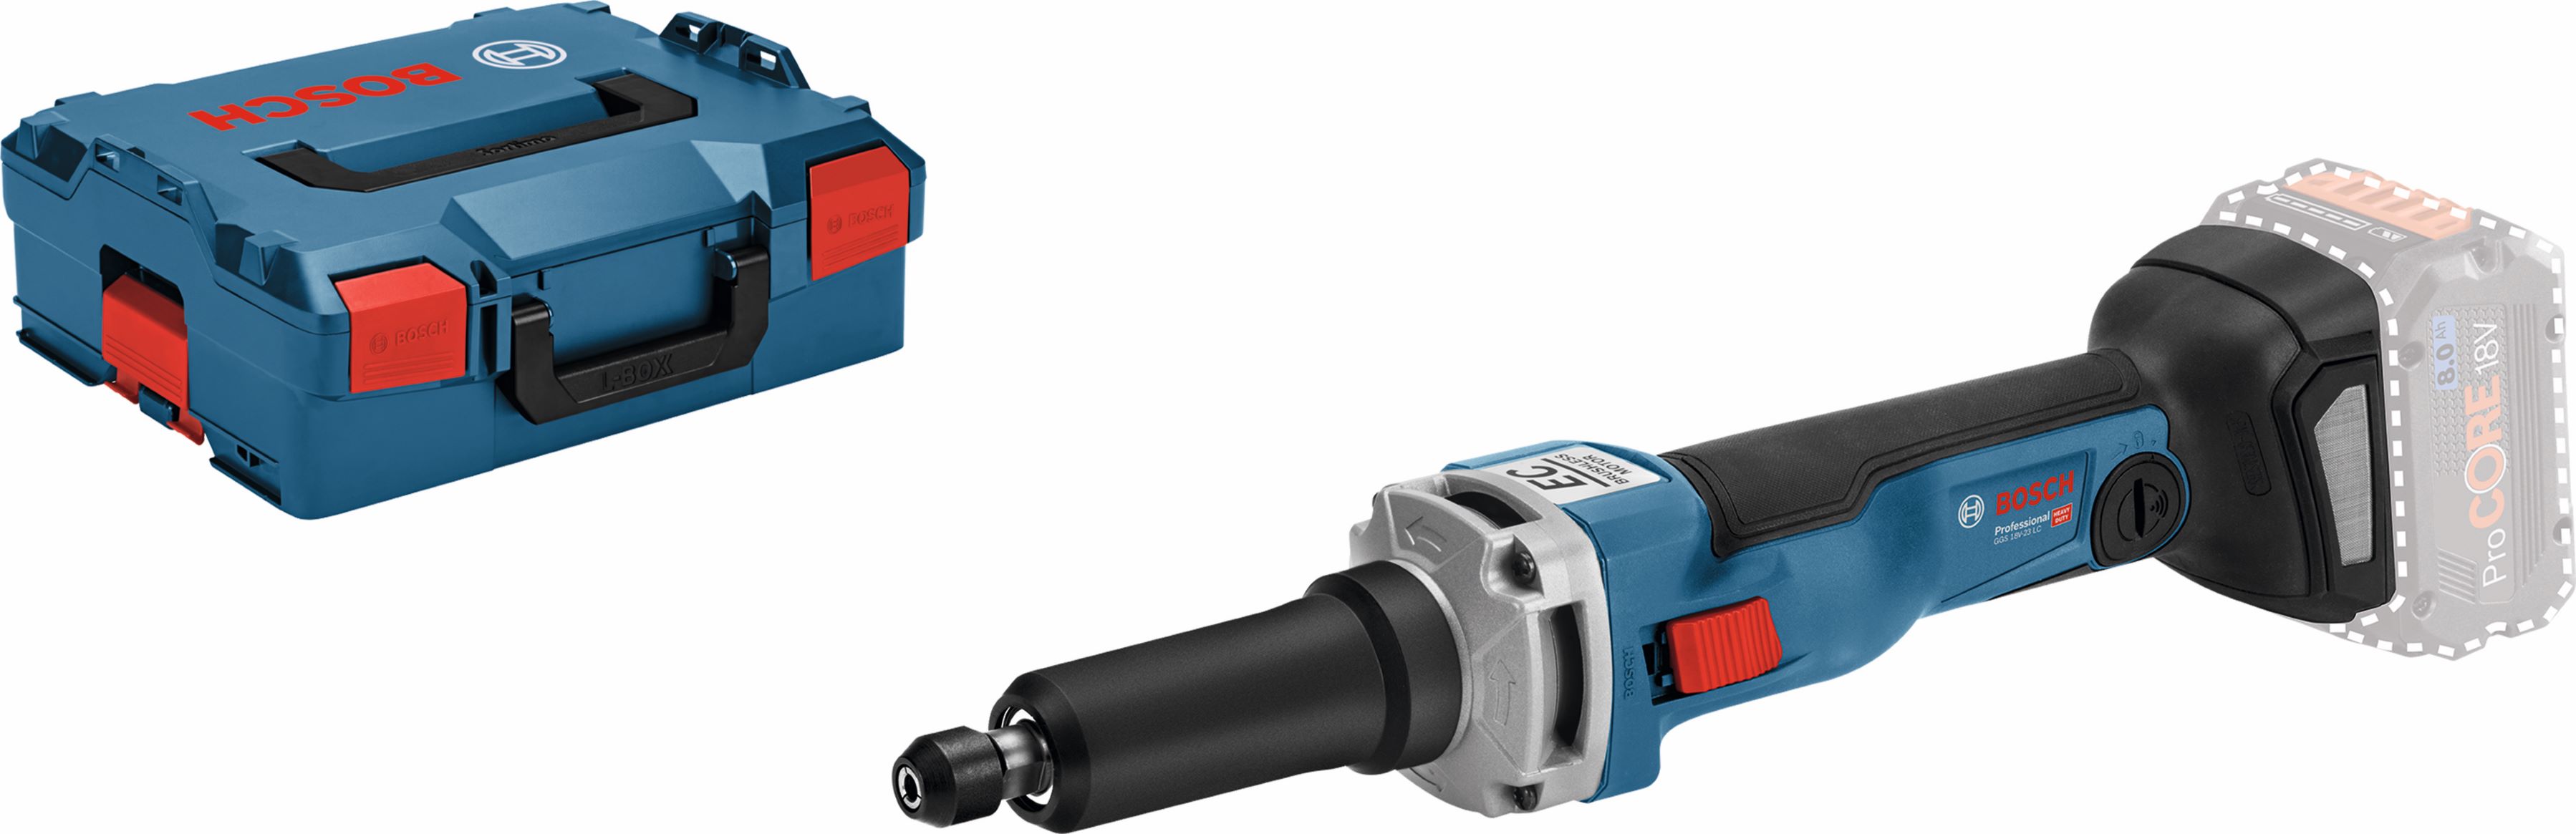 GGS 18V-23 LC Cordless Straight Grinder in L-Boxx Bosch - 2